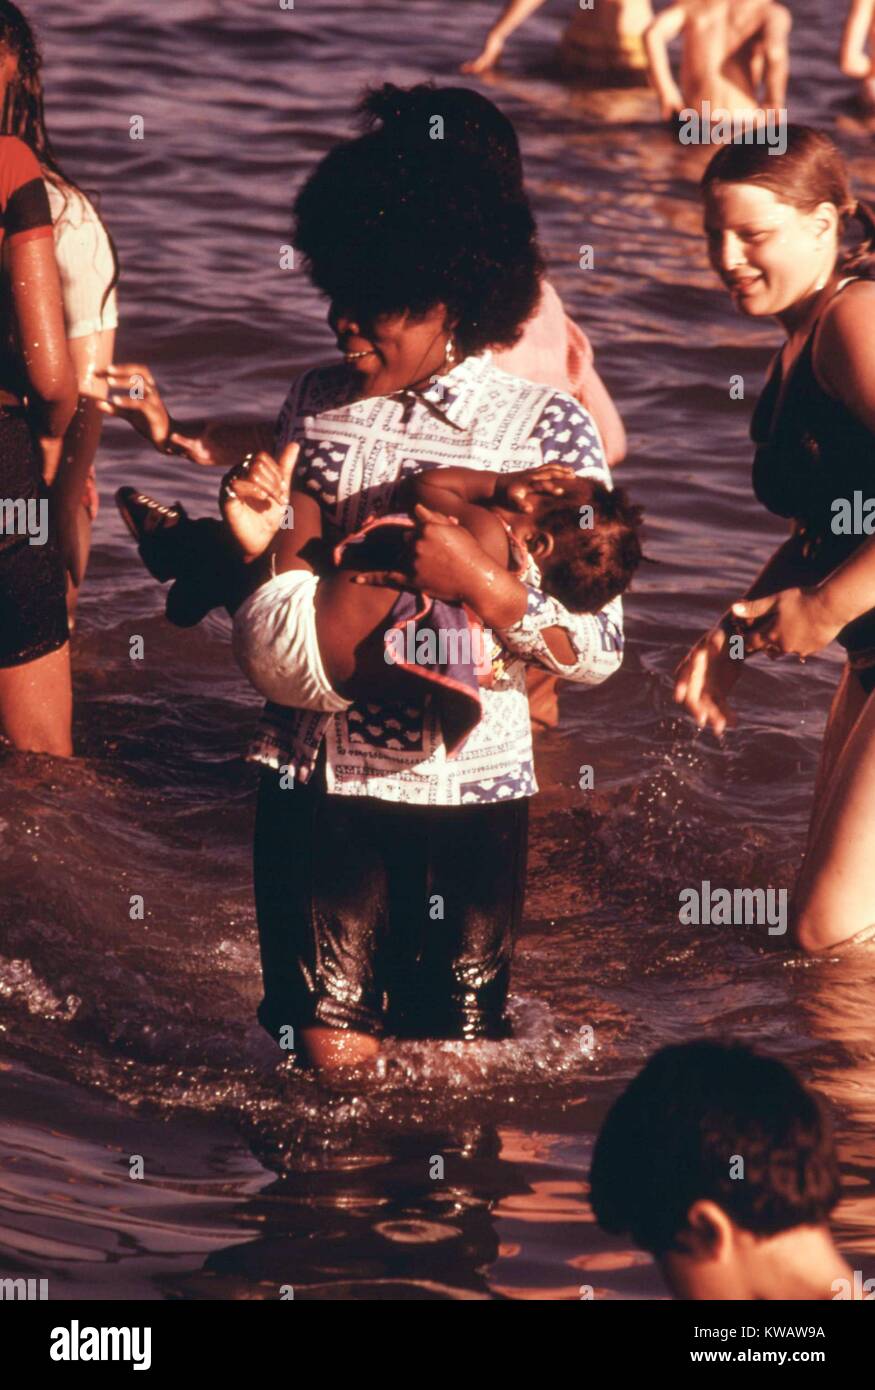 Chicago families socialize in the sun at the 12th Street beach on Lake  Michigan, Illinois, August, 1973. Image courtesy John White/US National  Archives Stock Photo - Alamy